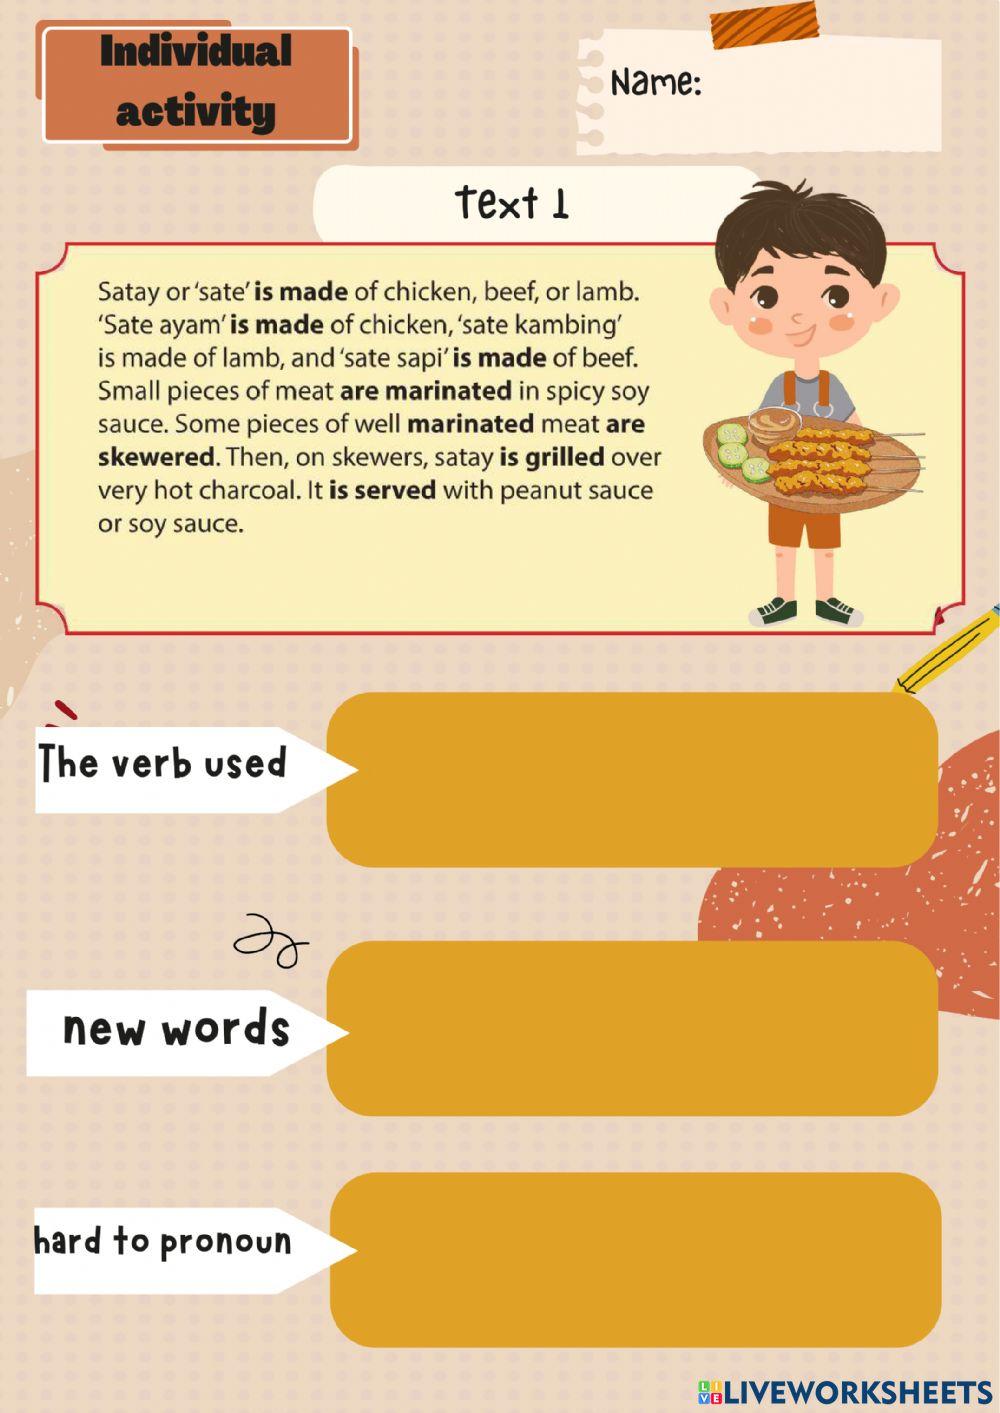 The use of passive voice